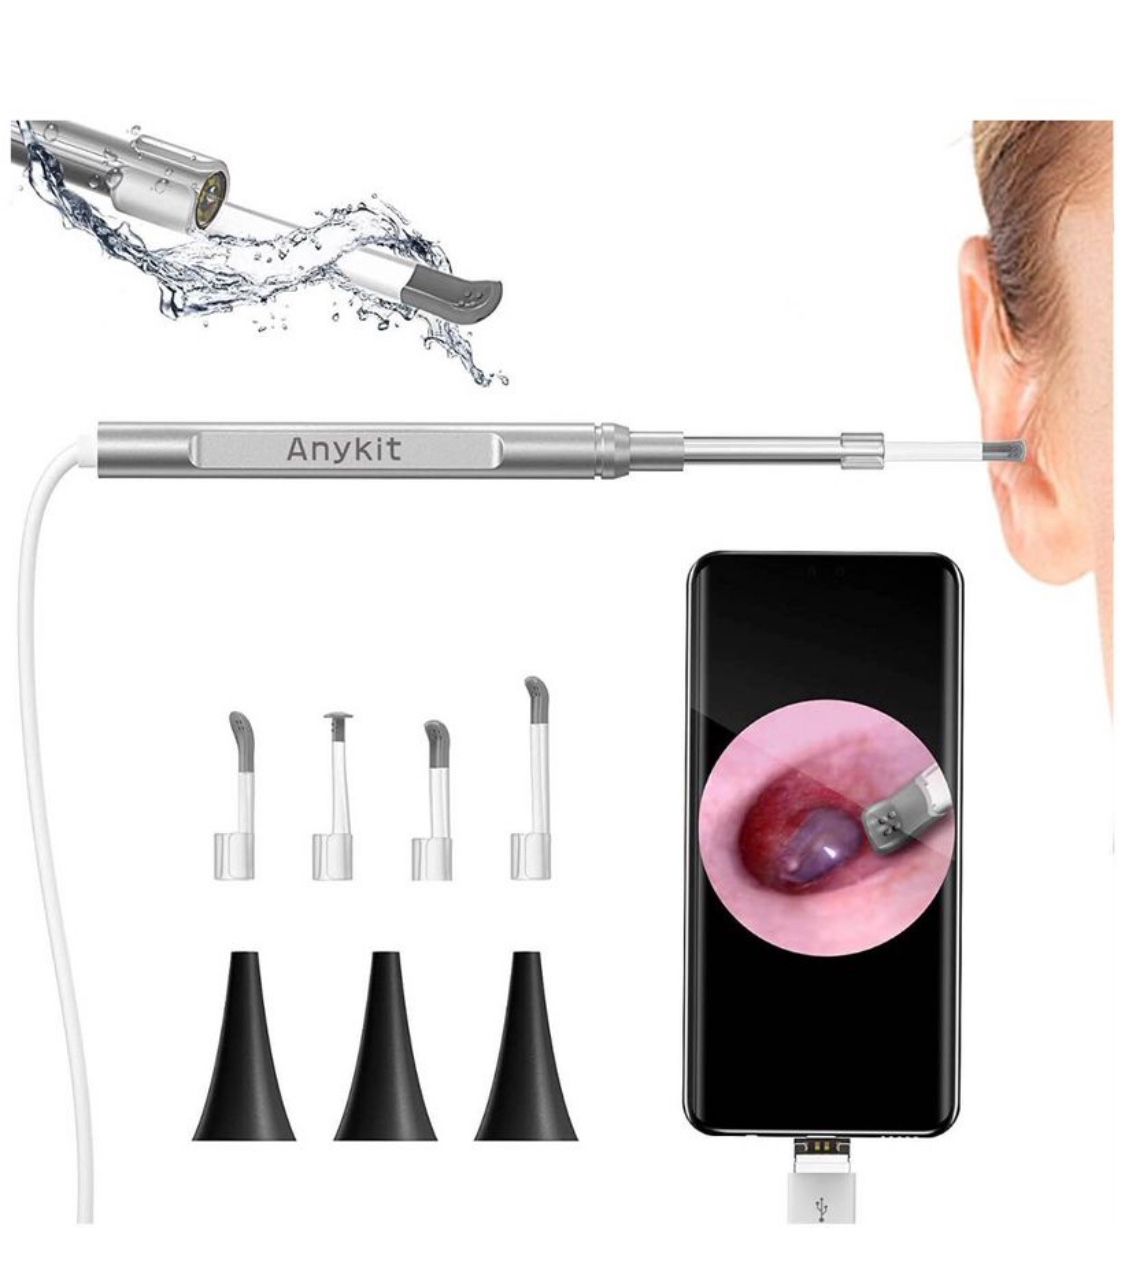 New! Ear Wax Removal Tool, HD Otoscope for Android and PC, Ultra Clear View Ear Camera with Wax Remover, Ear Endoscope with LED Lights, Ear Cleaning C